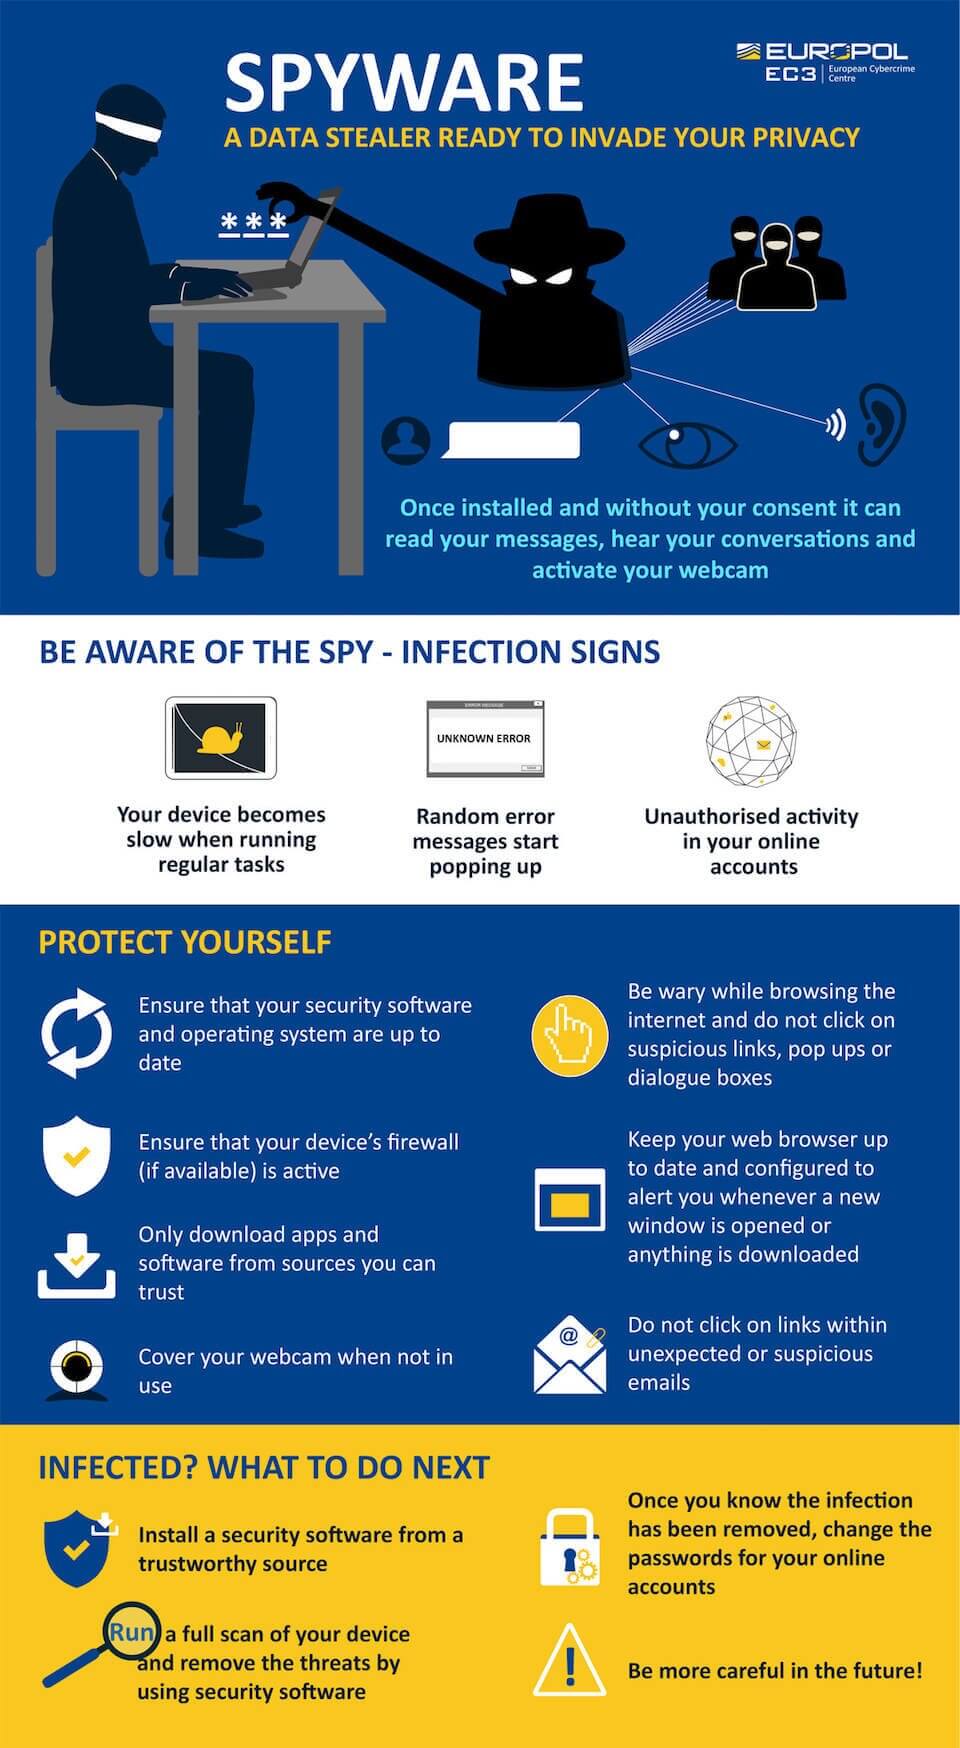 An infographic showing how Spyware works